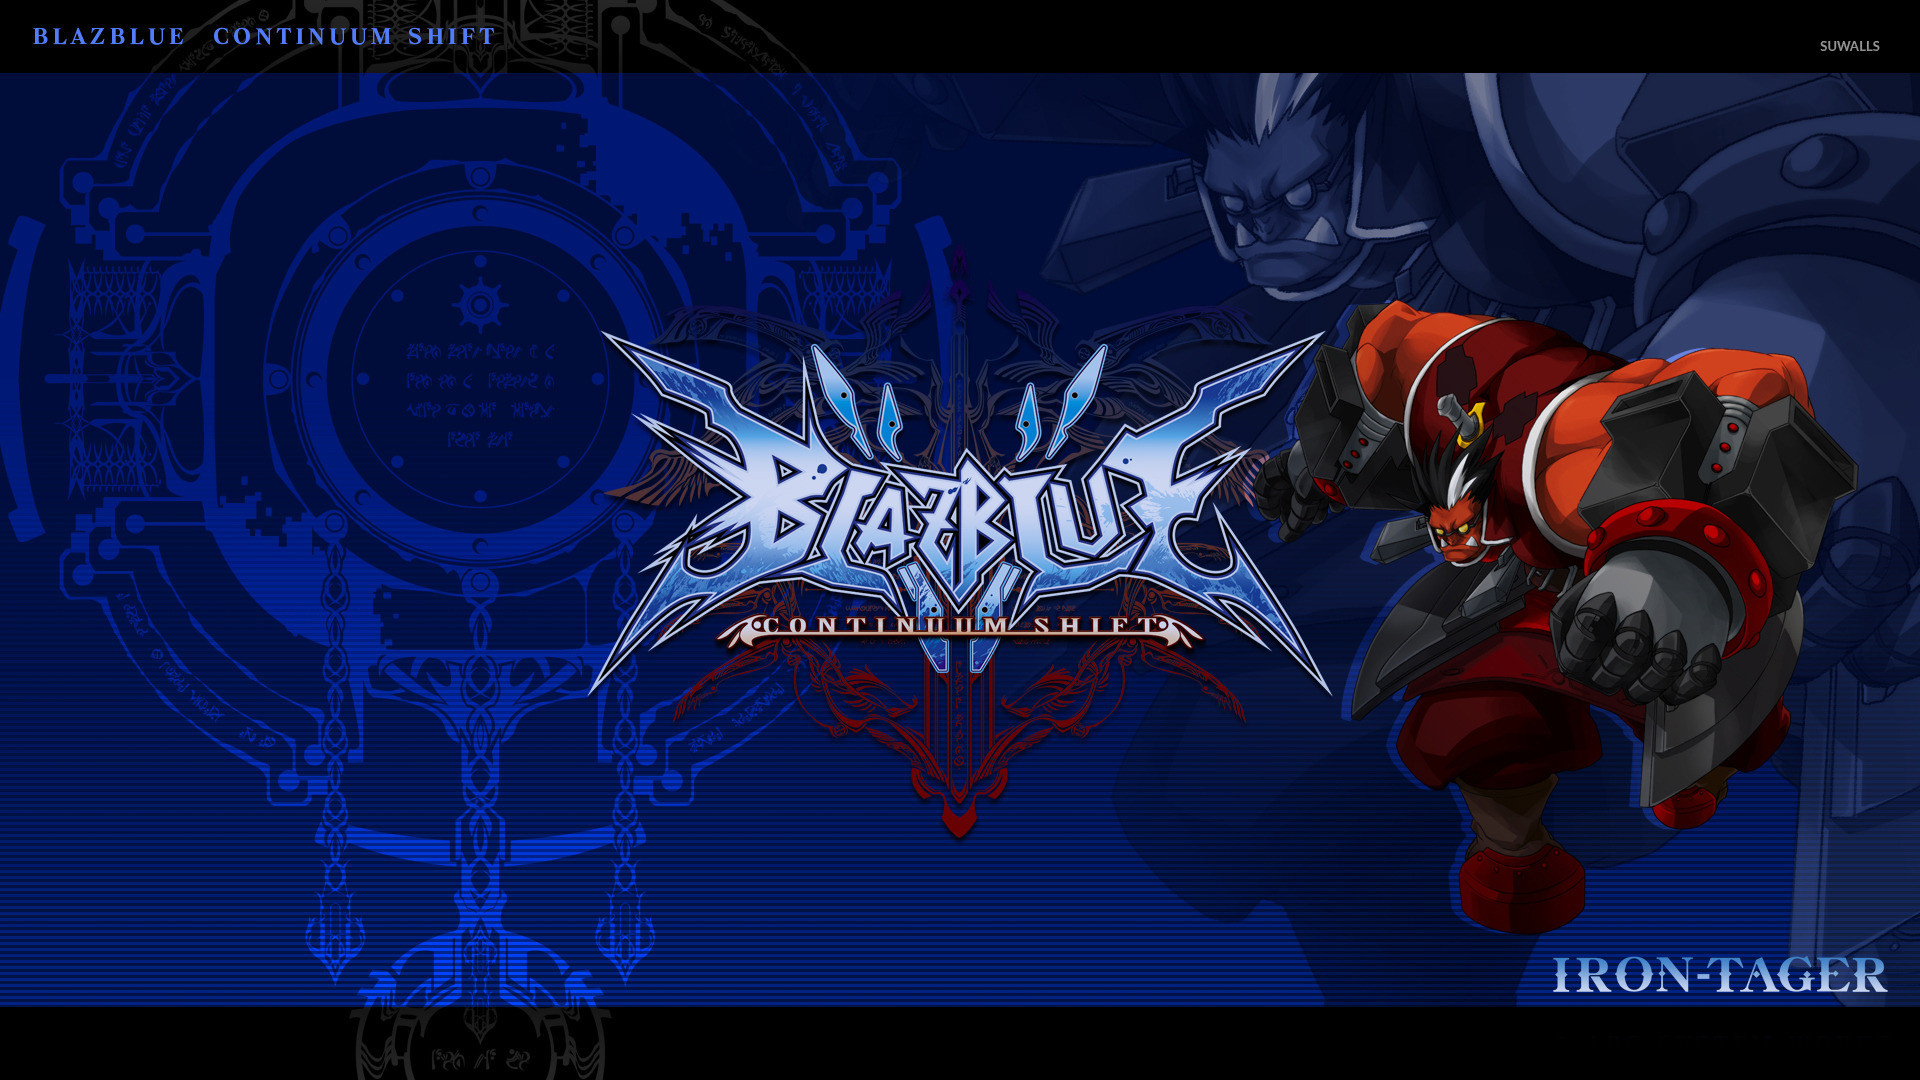 1920x1080 Iron Tager - BlazBlue: Continuum Shift wallpaper